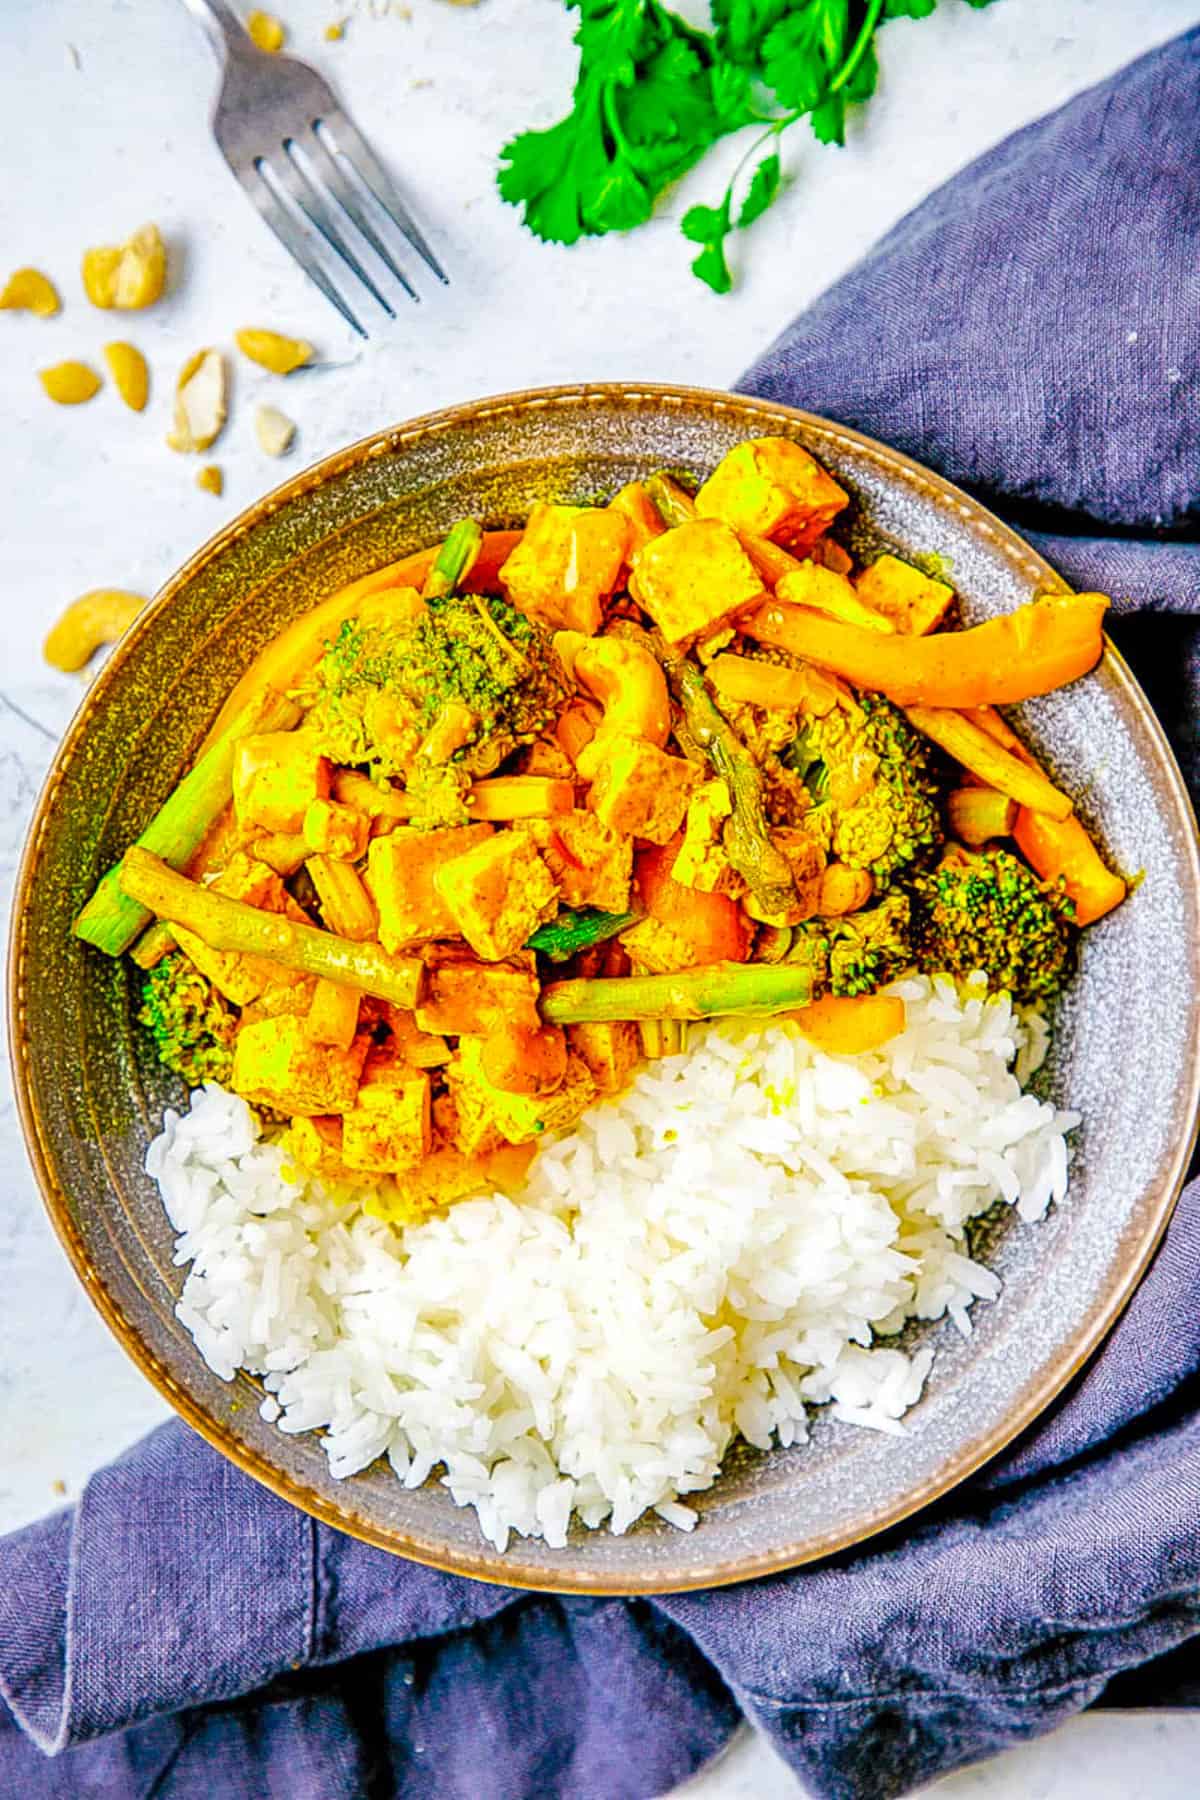 Thai tofu yellow curry with broccoli, ،atoes, asparagus and peppers served in a grey bowl.